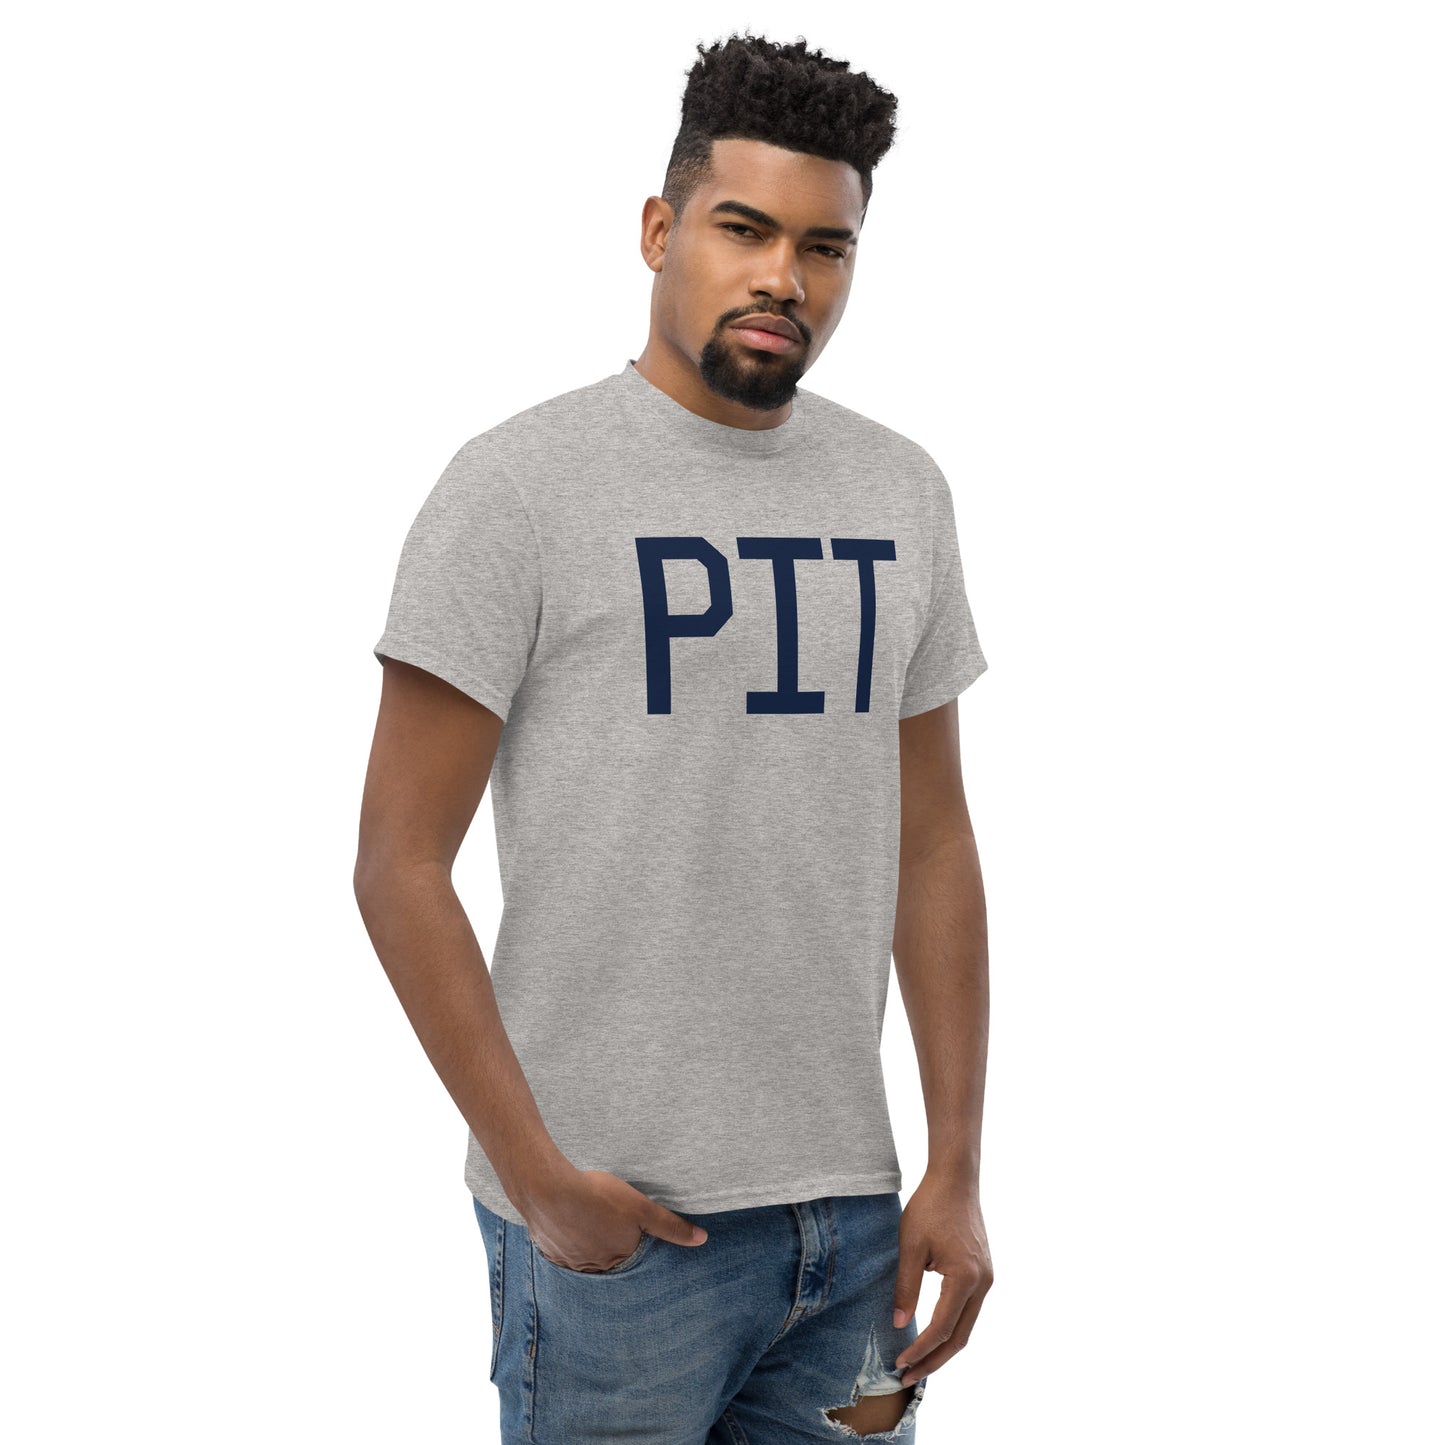 Aviation-Theme Men's T-Shirt - Navy Blue Graphic • PIT Pittsburgh • YHM Designs - Image 08